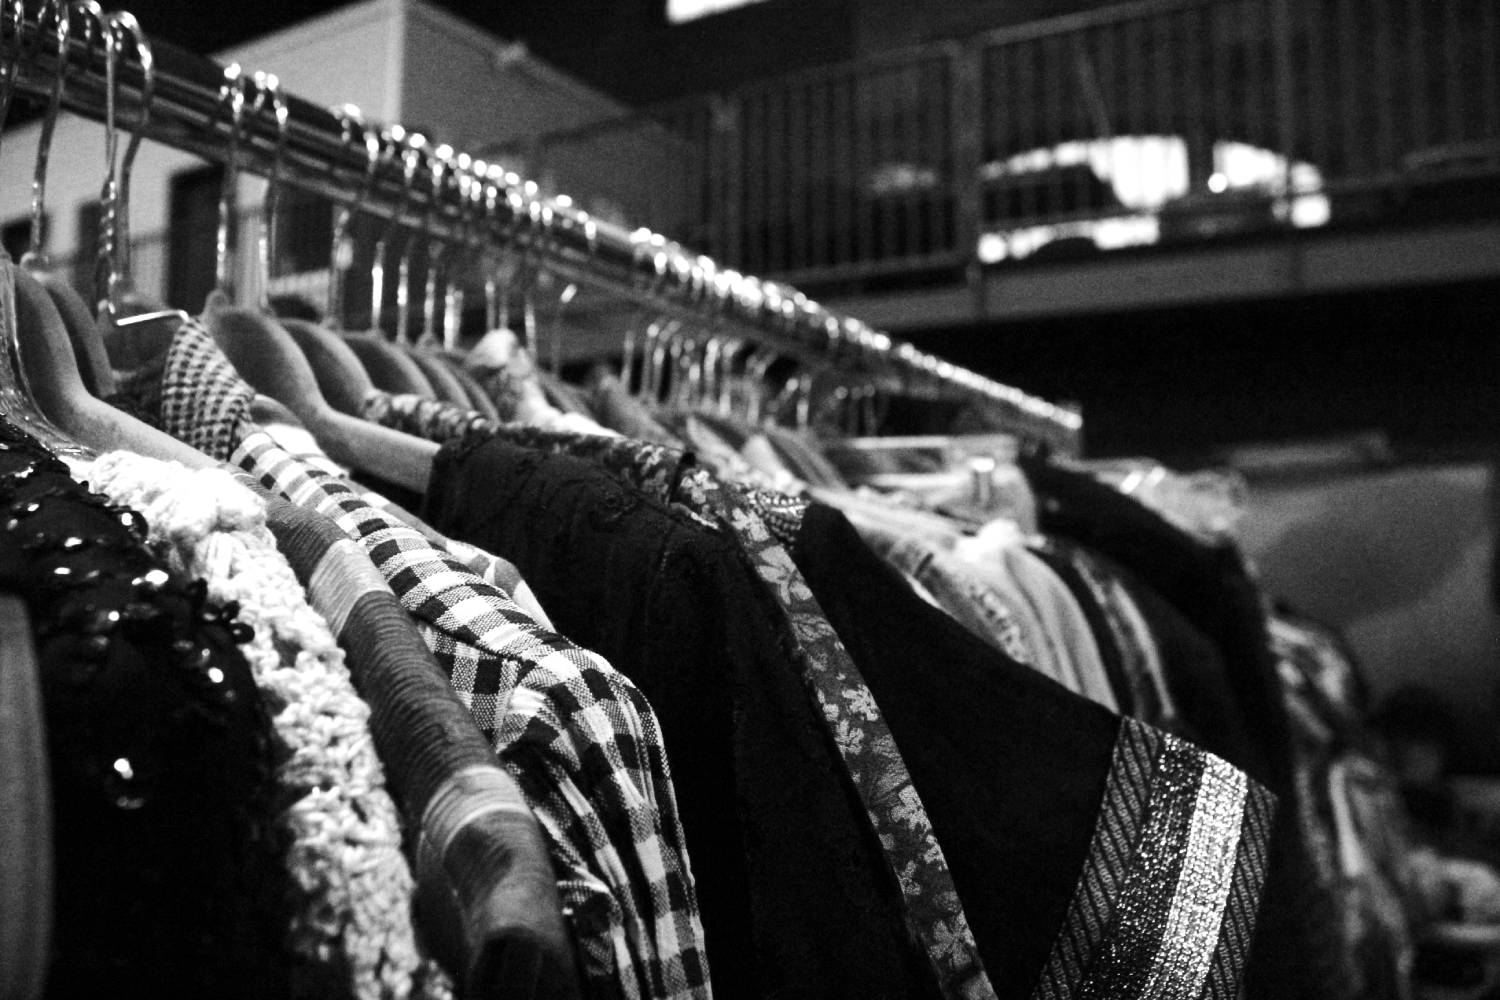 A rack of clothing on display.